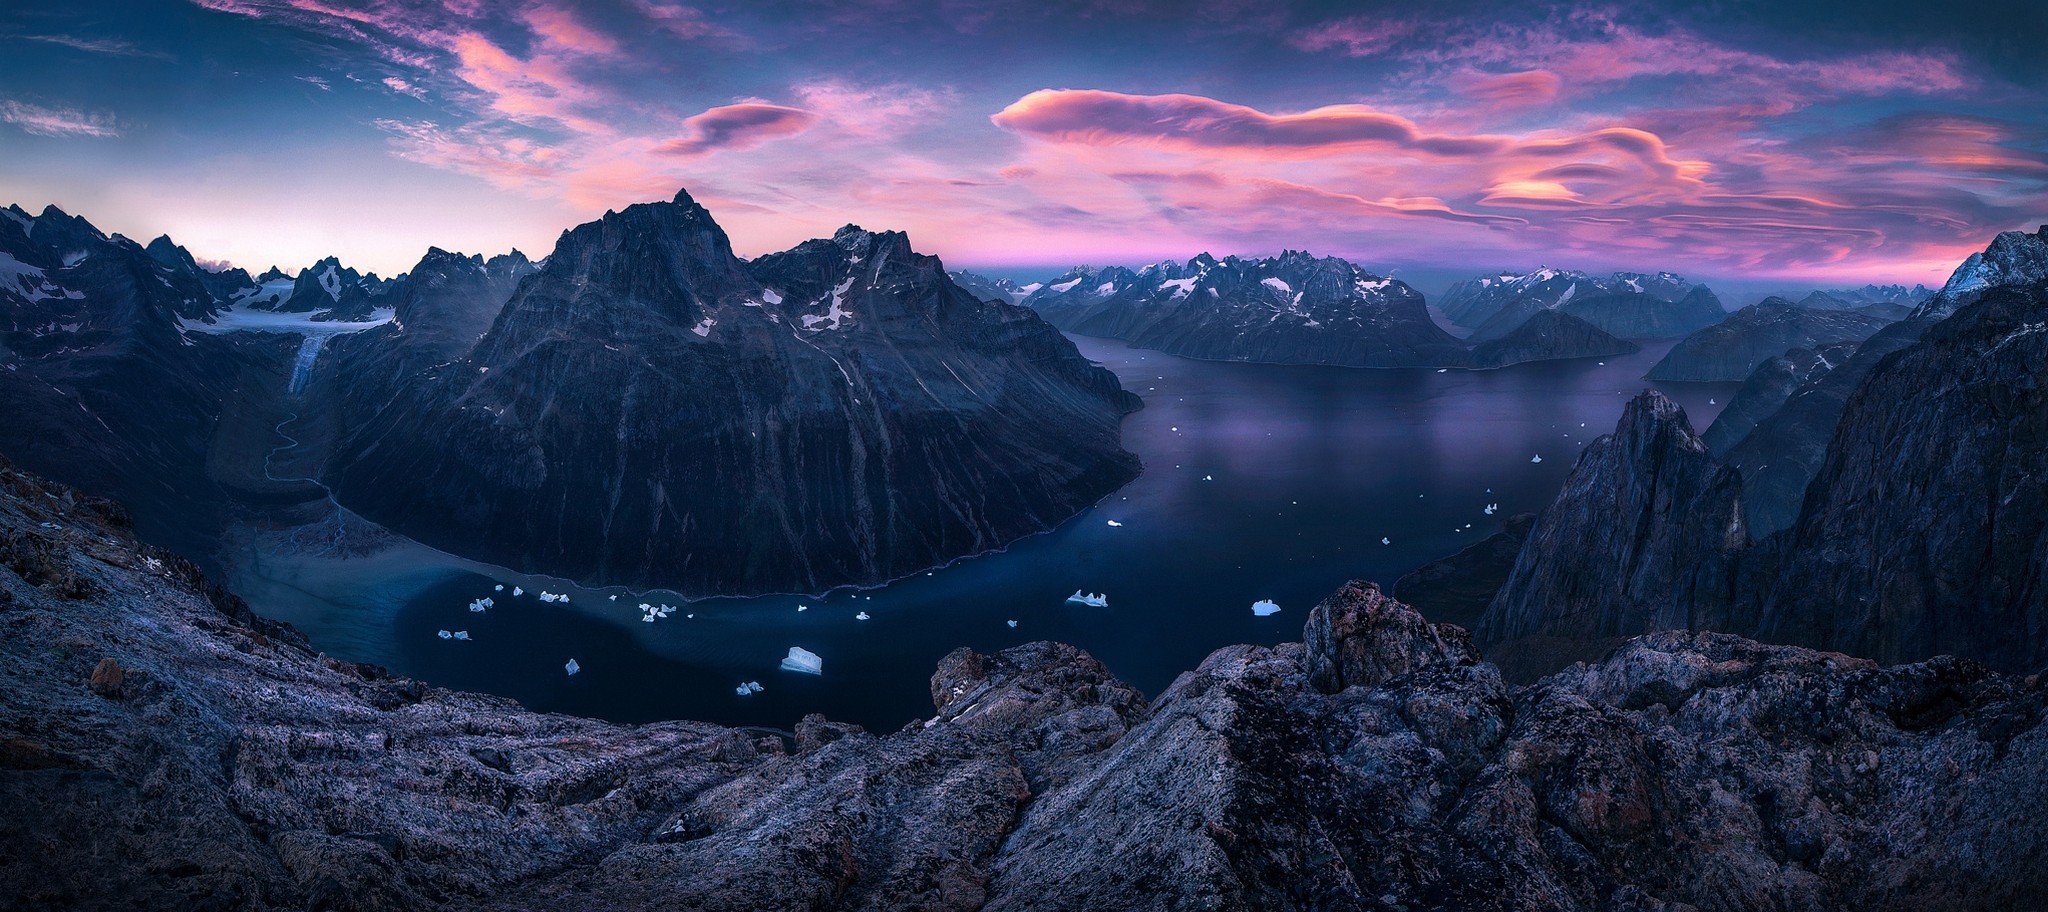 General 2048x912 nature landscape sunset mountains panorama fjord clouds sky ice rocks Greenland nordic landscapes